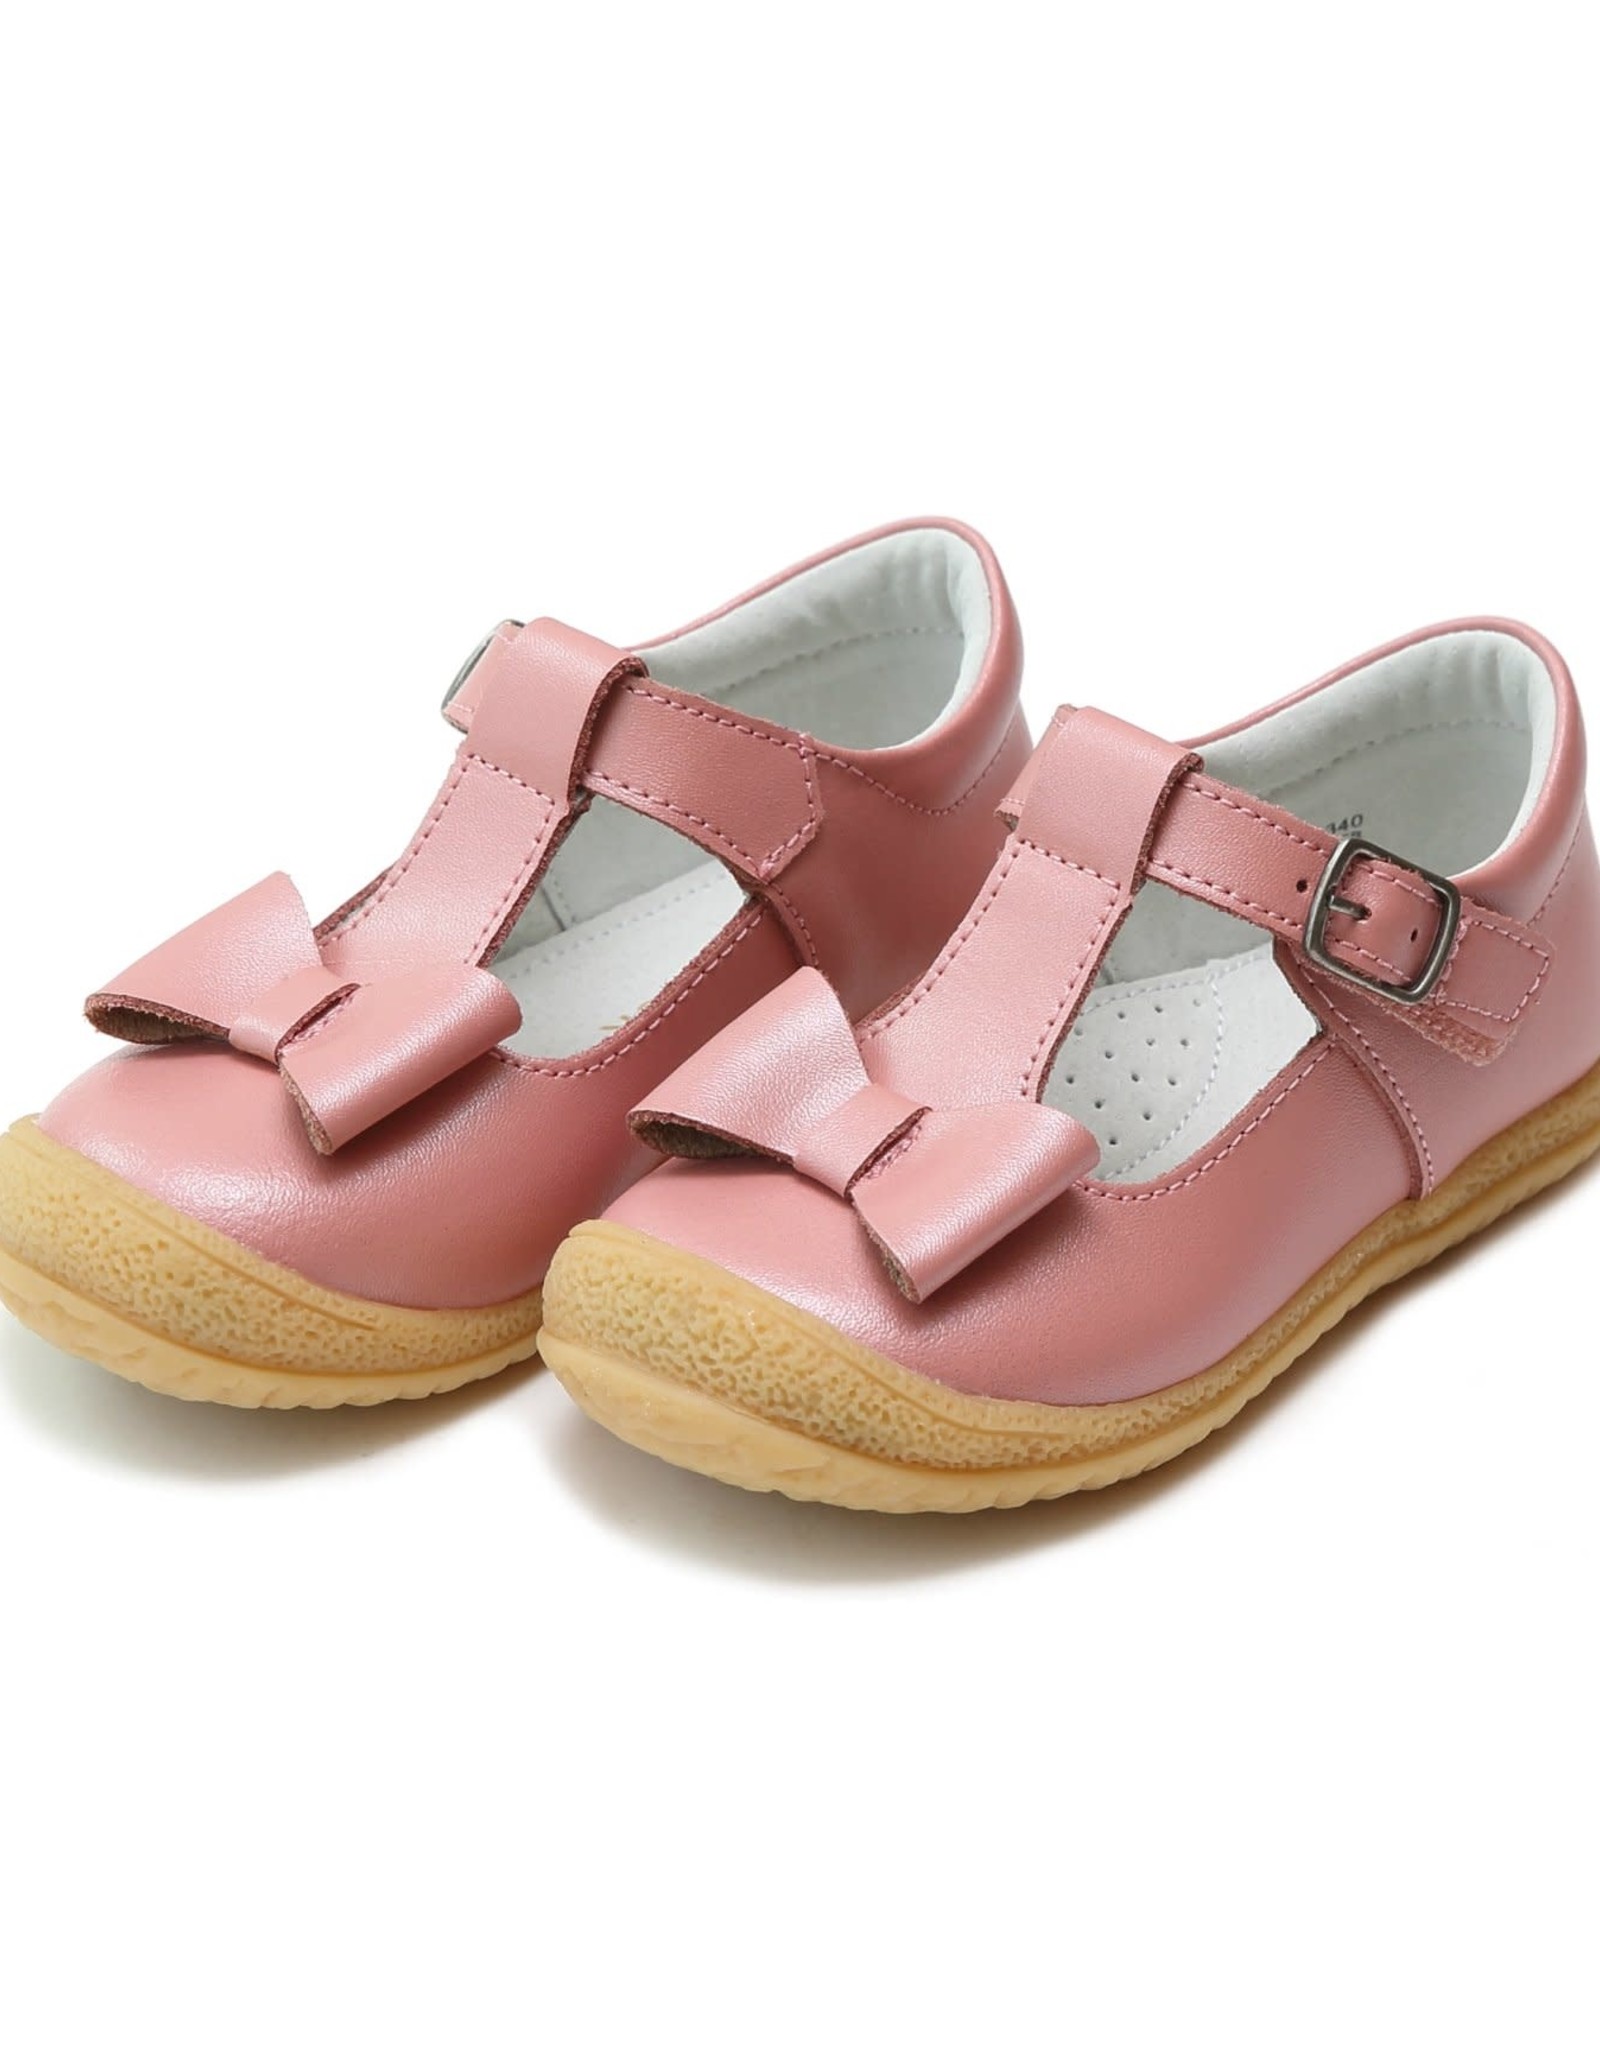 L'AMOUR Emma Autumn Bow T-Strap Mary Jane in Rose